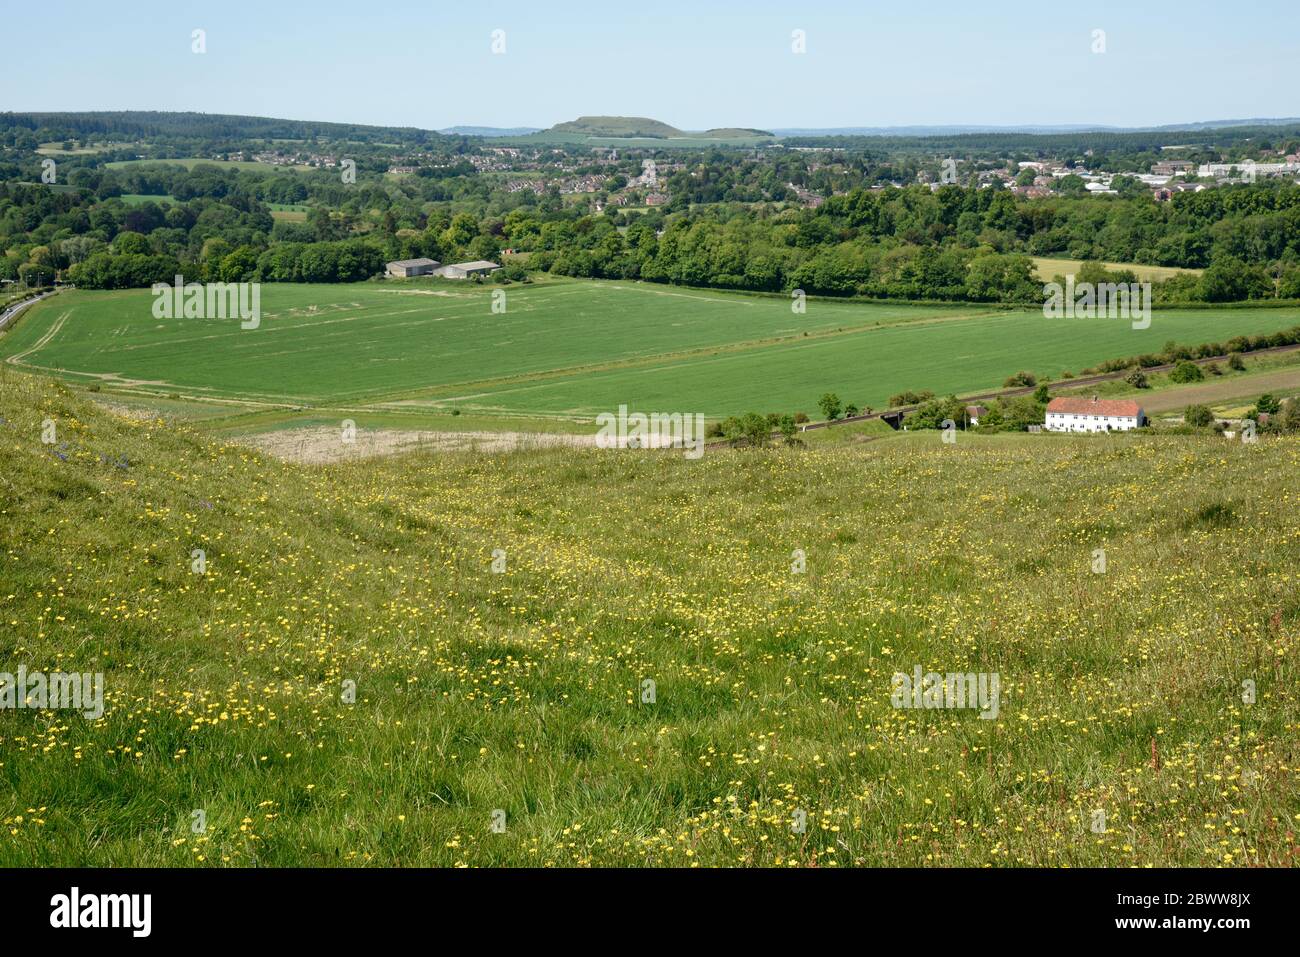 View toward Cley Hill from Scratchbury Camp,Hill Fort, Wiltshire, England, UK Stock Photo